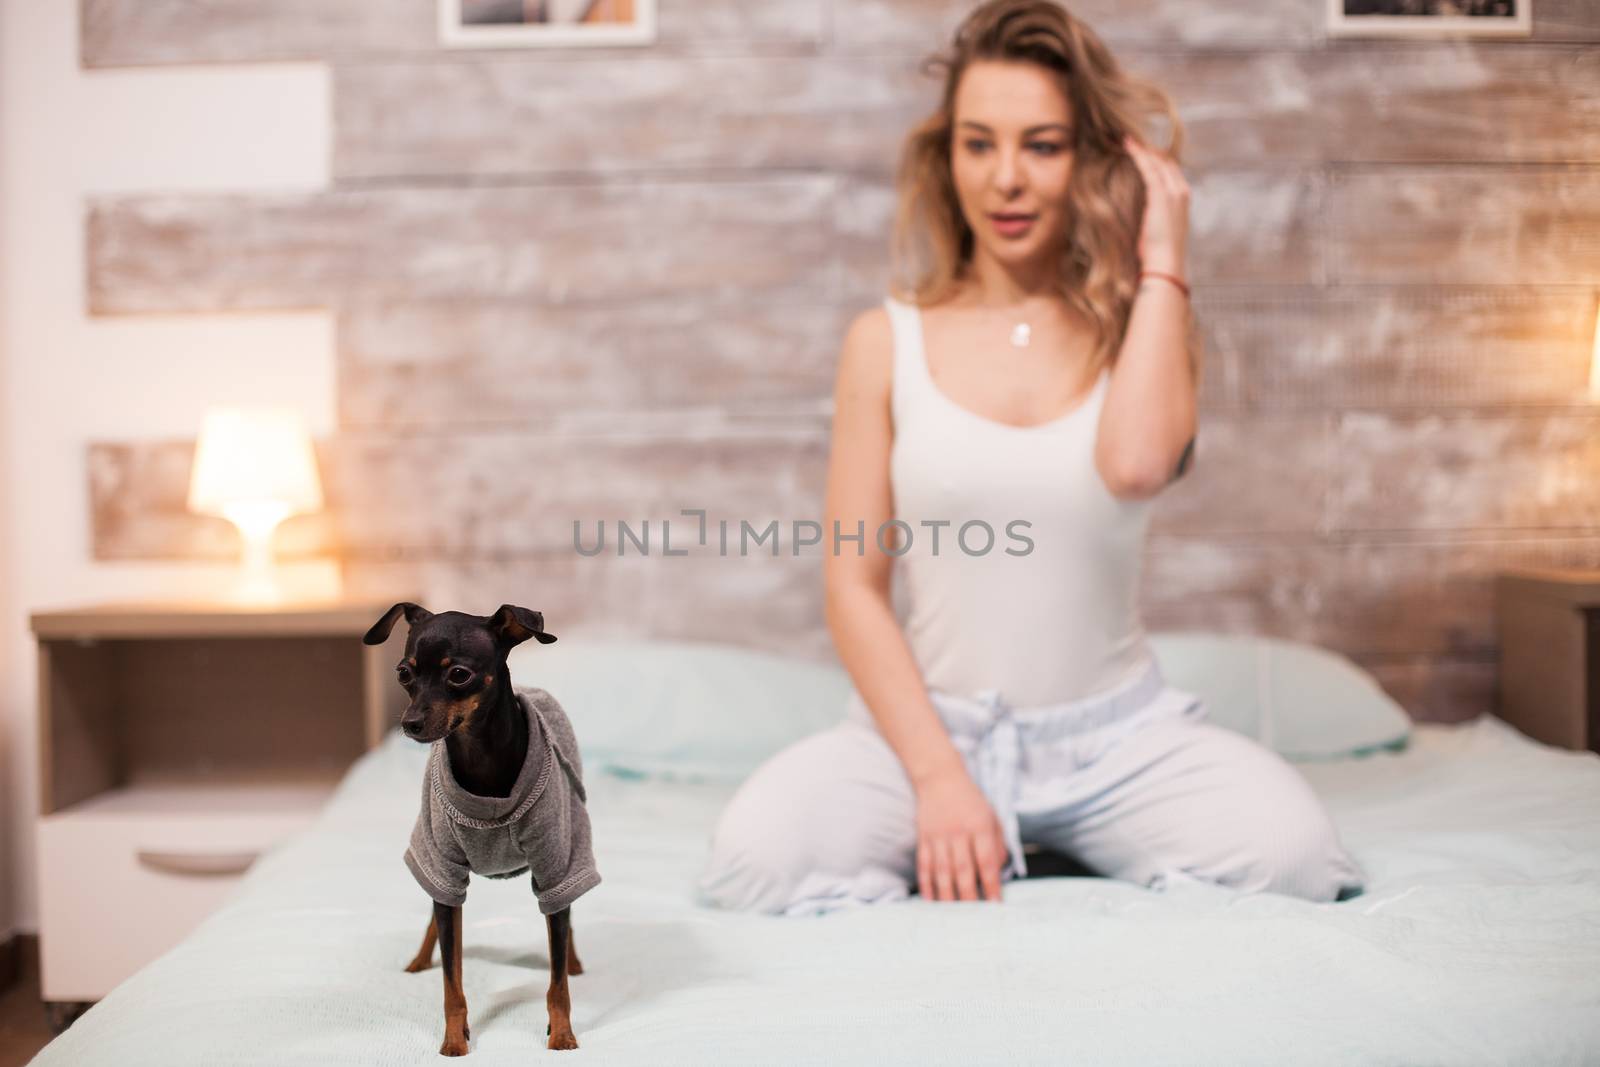 Playful little dog sitting on bed at night with her beautiful owner dressed in pijapajamasmas.